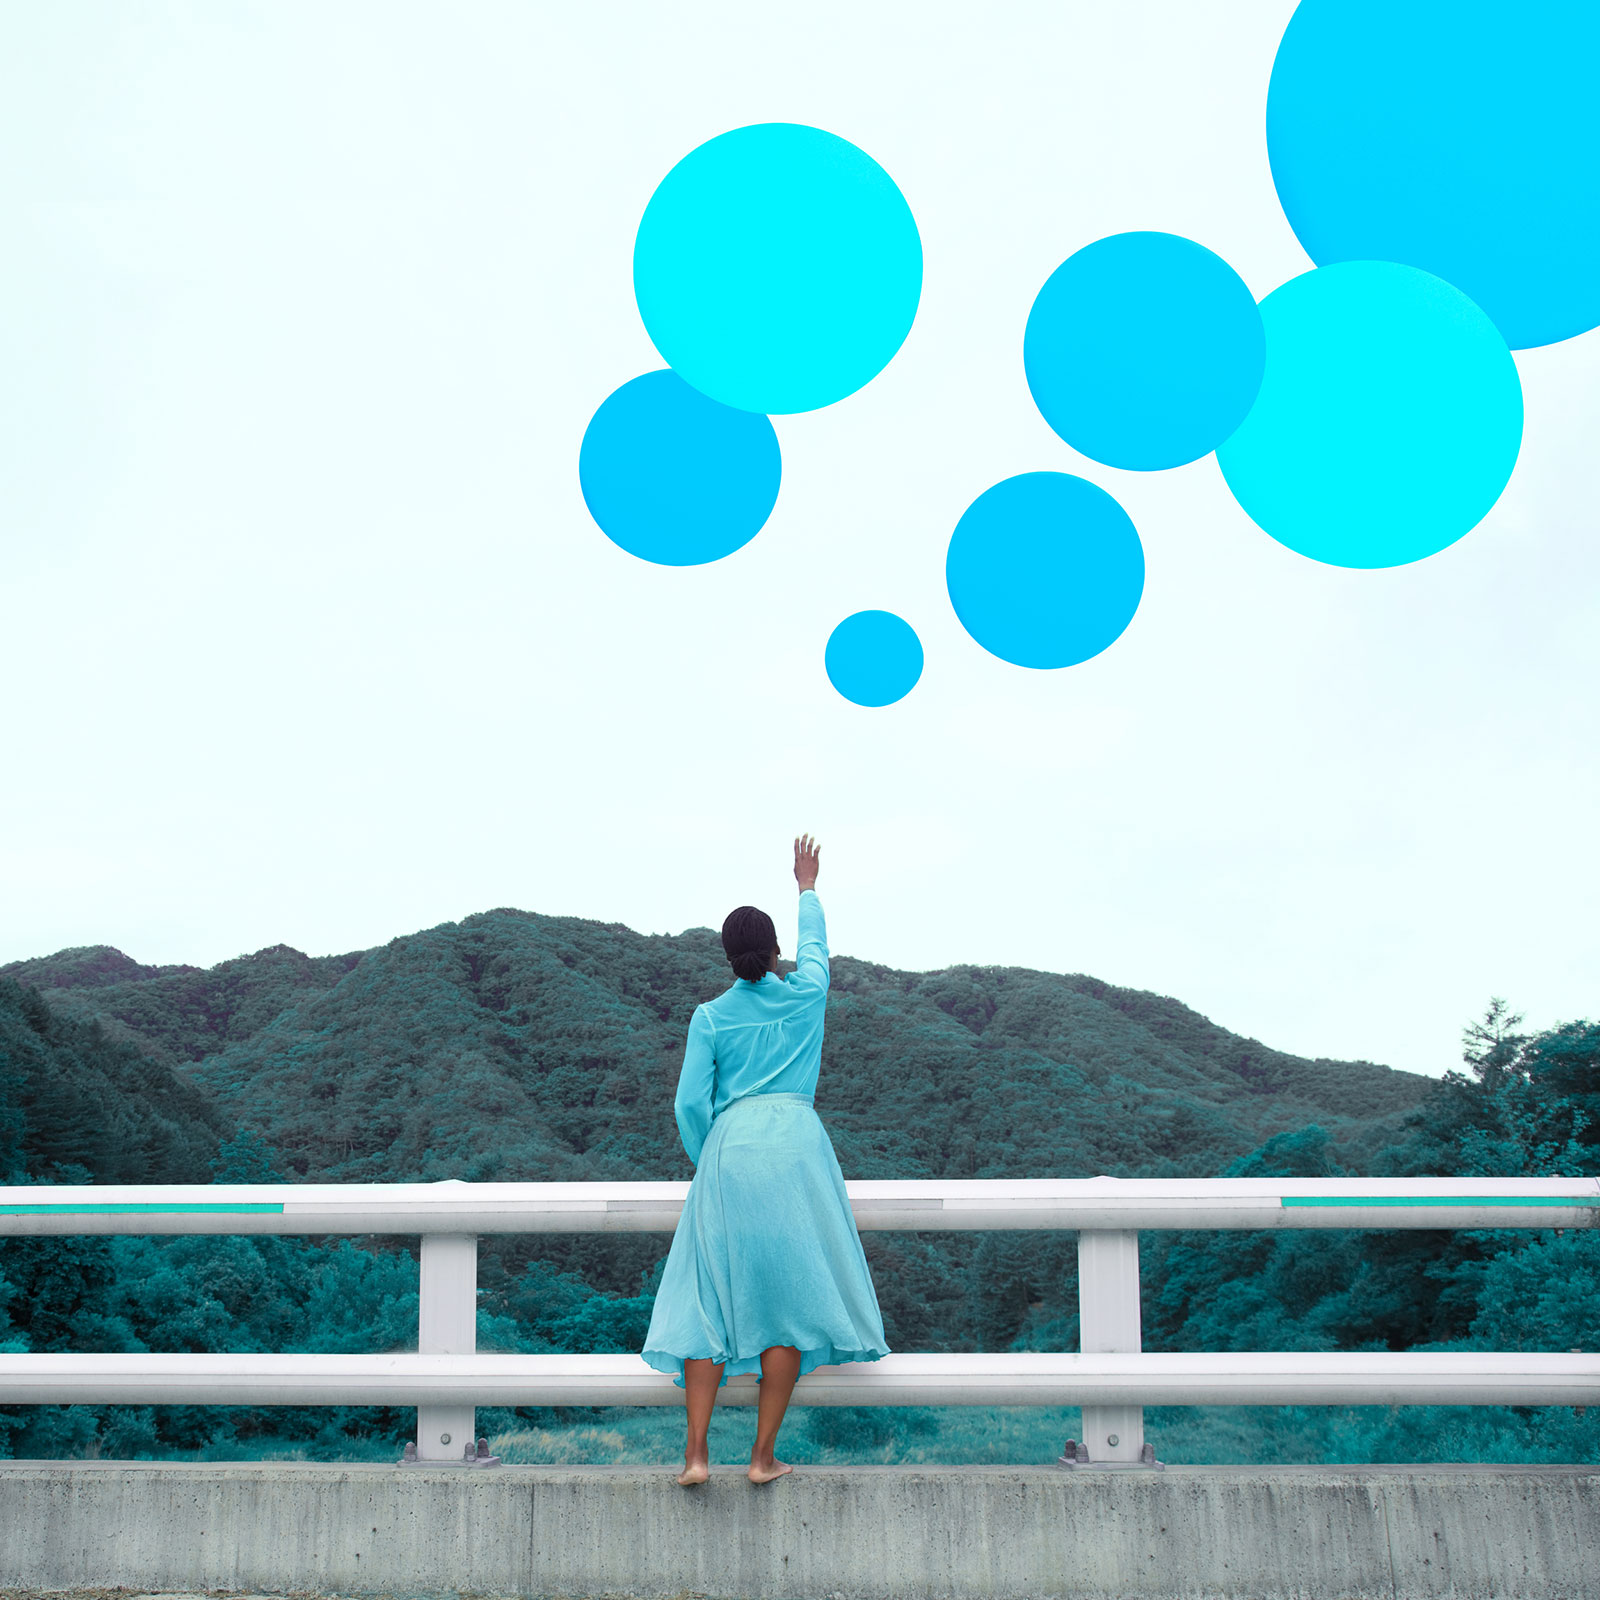 Woman reaching to the sky, towards bright blue balloons